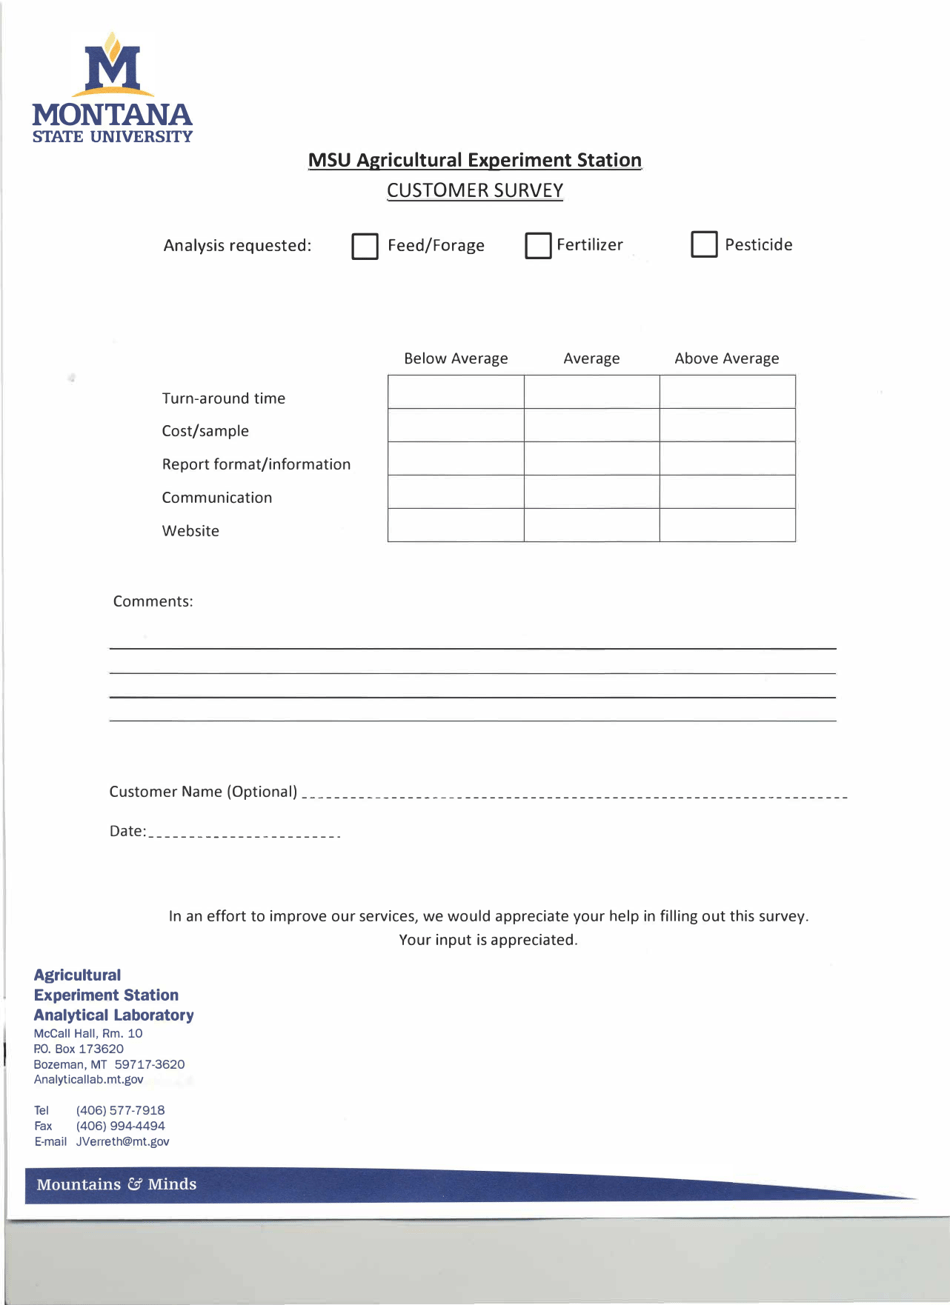 Msu Agricultural Experiment Station Customer Survey - Montana, Page 1